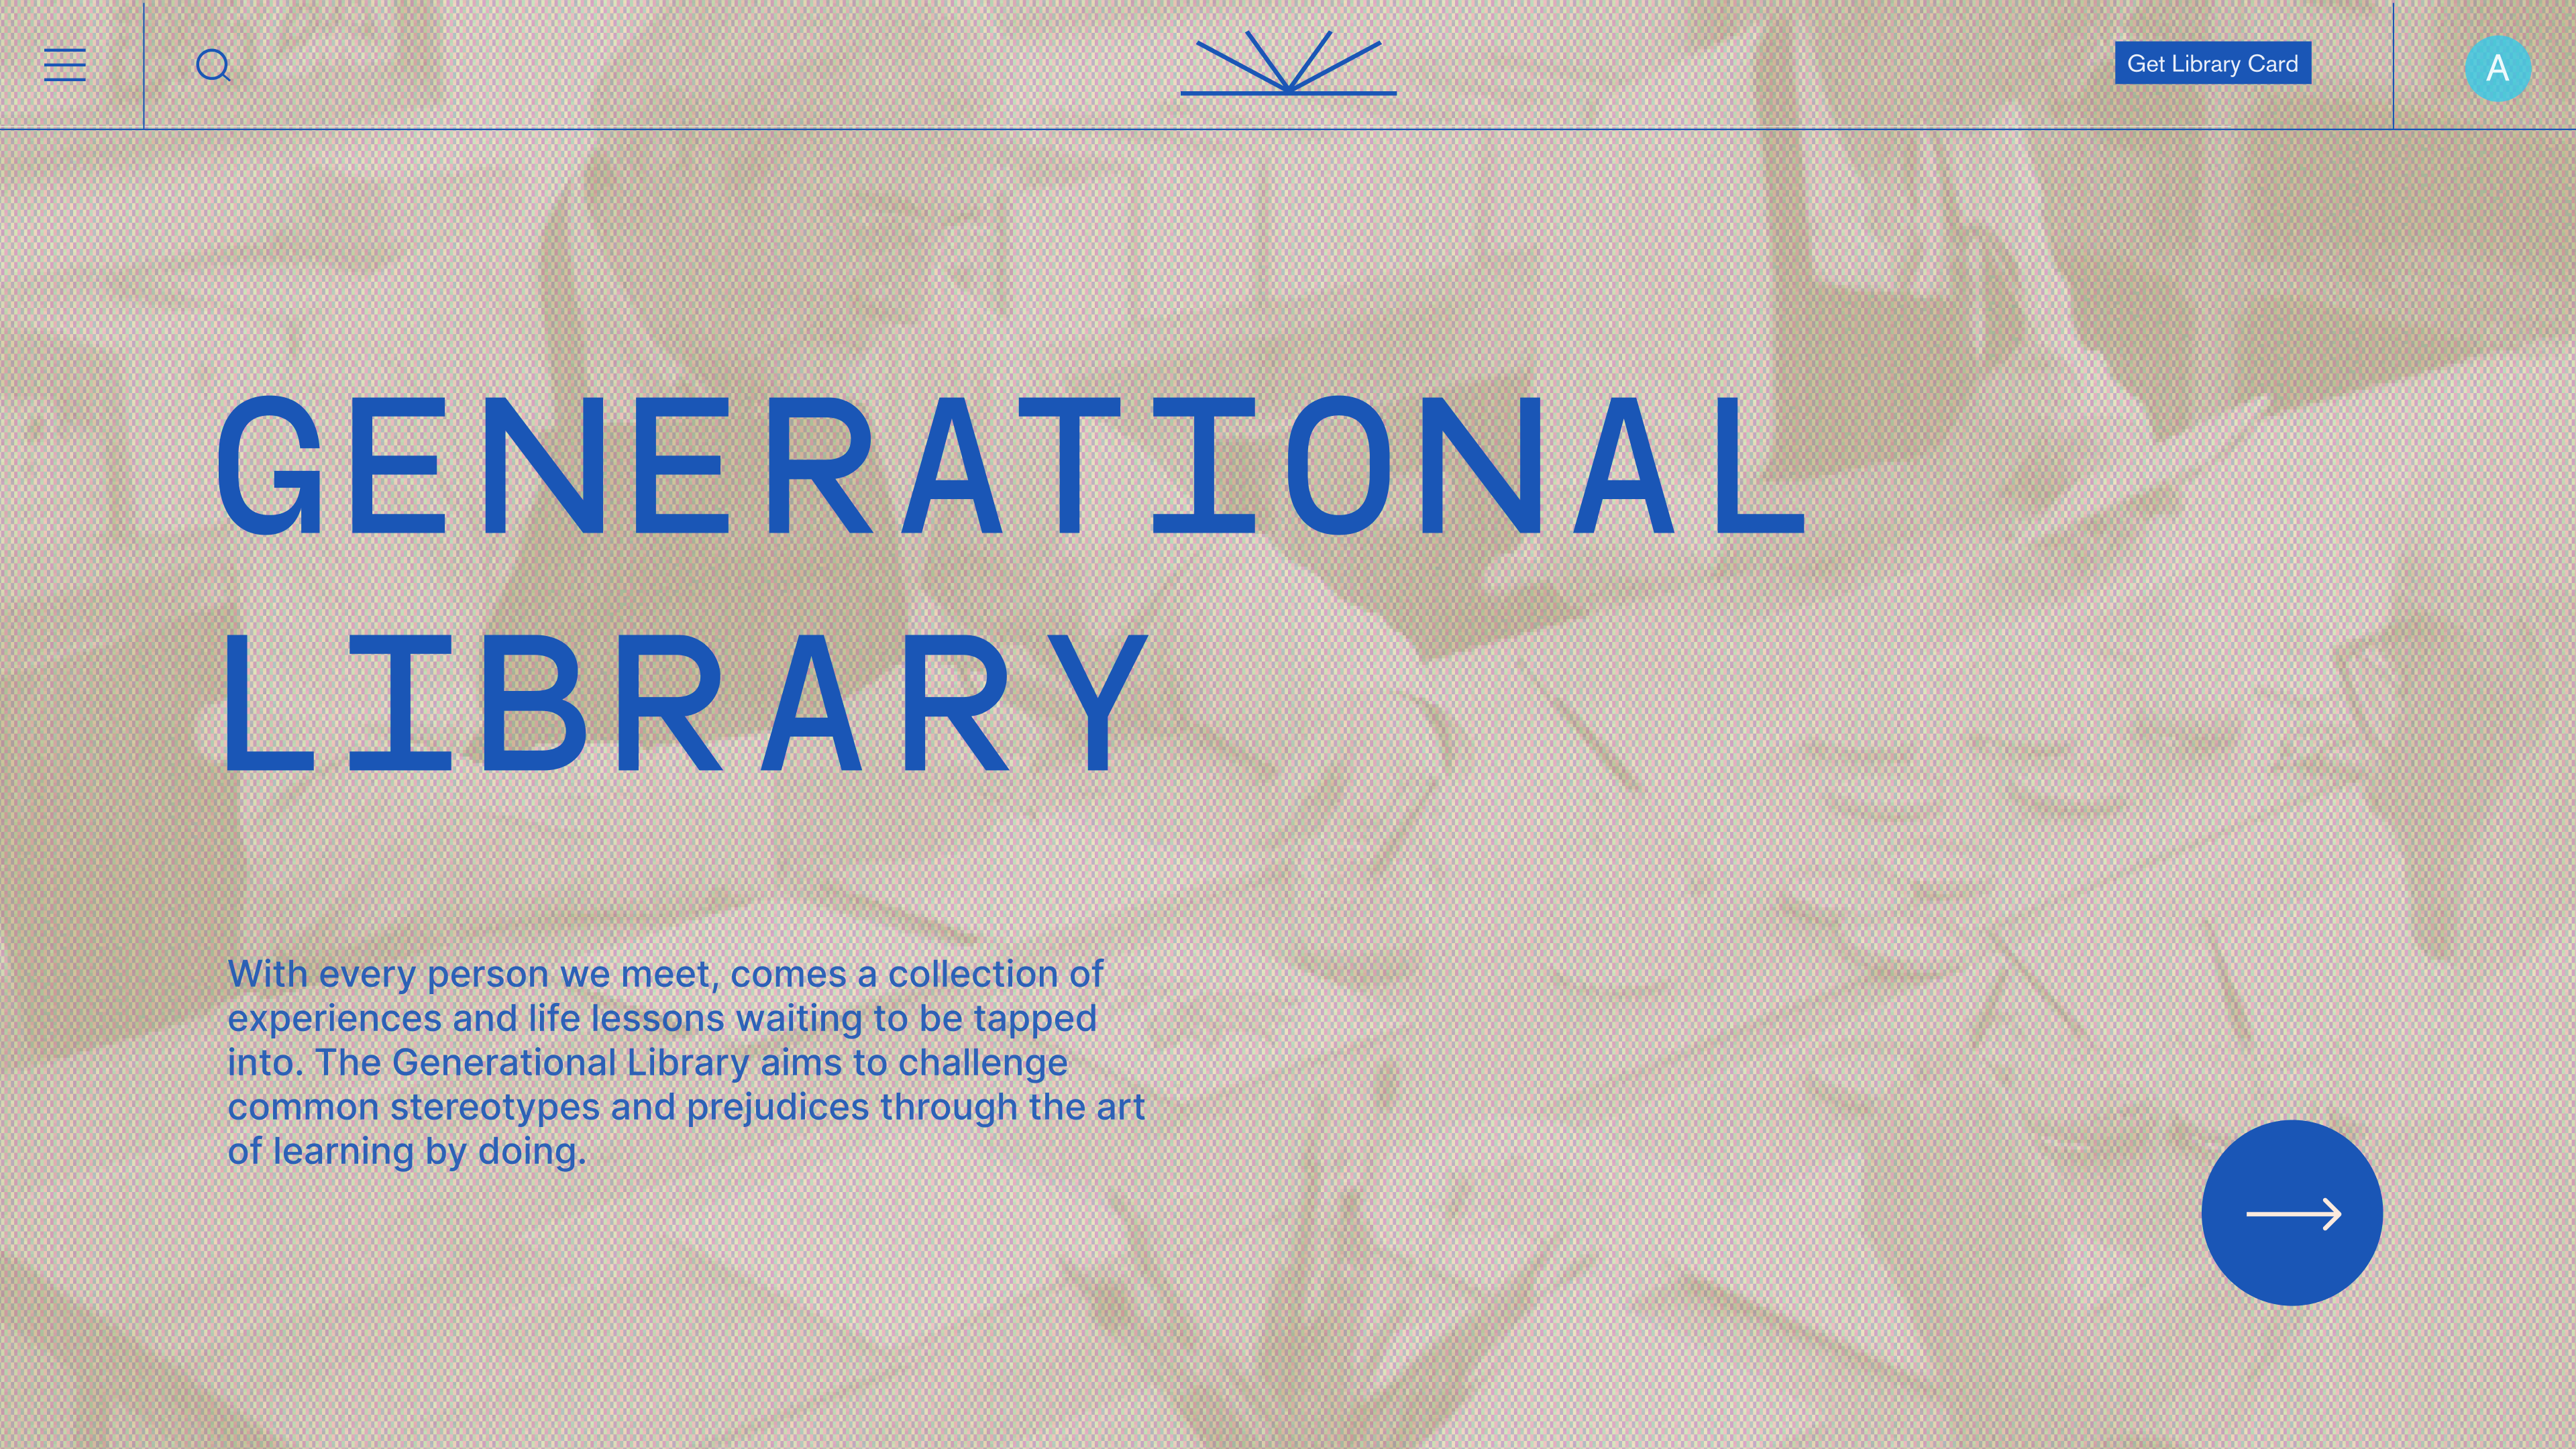 The landing page of the Generational Library site